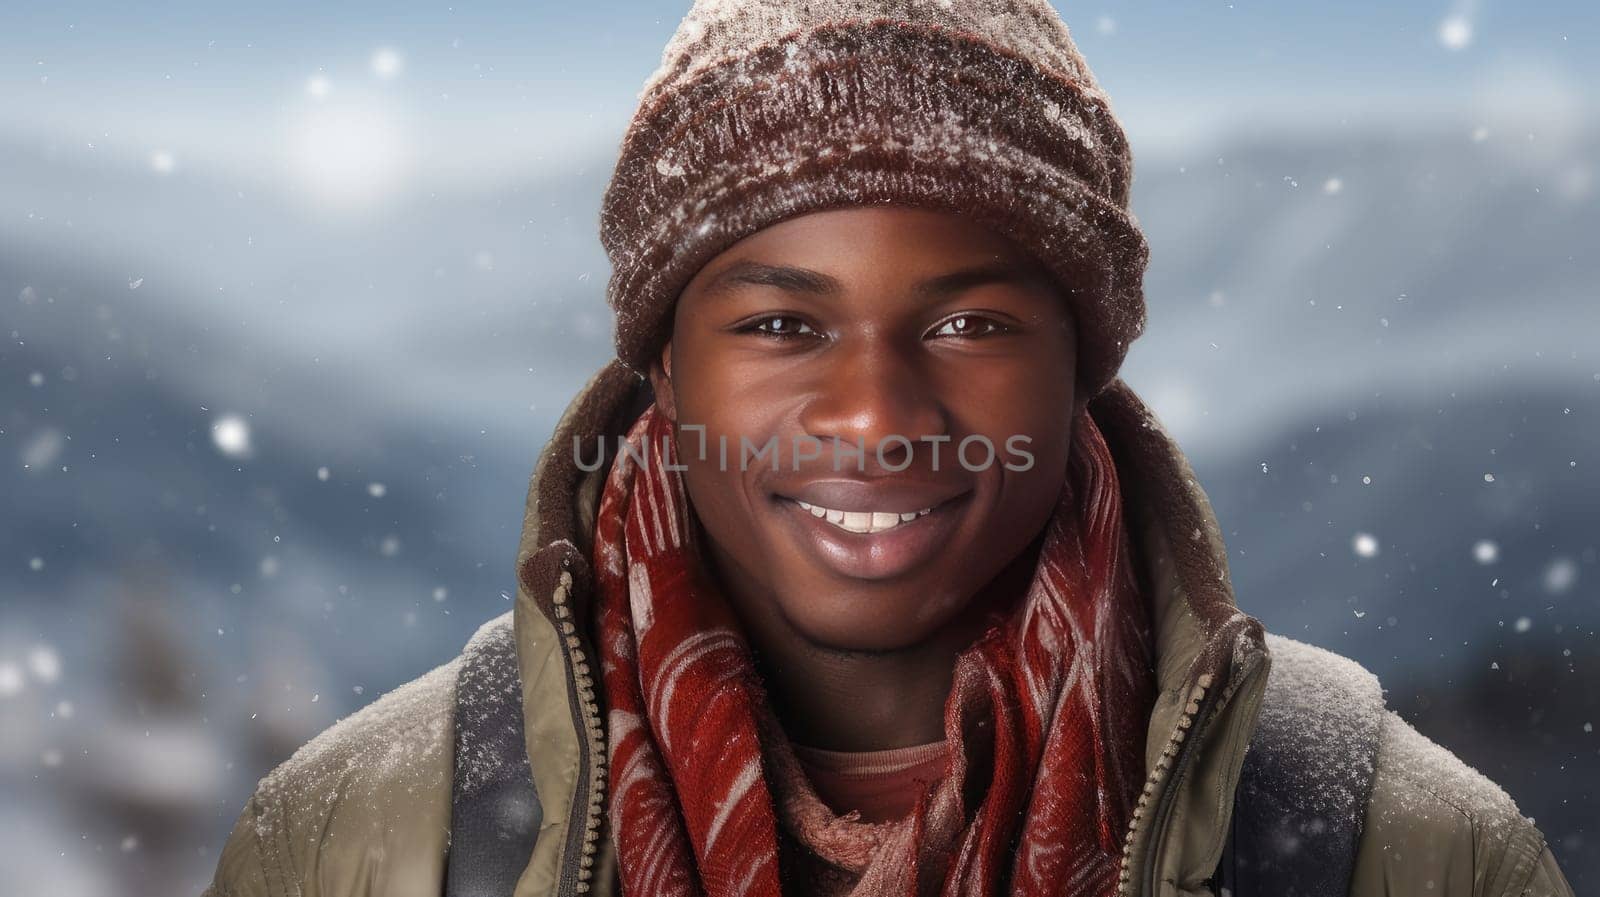 Portrait of a young handsome smiling African-American guy in a jacket against the backdrop of a winter, snowy landscape. Concept of traveling around the world, recreation, winter sports, vacations, tourism in the mountains and unusual places.